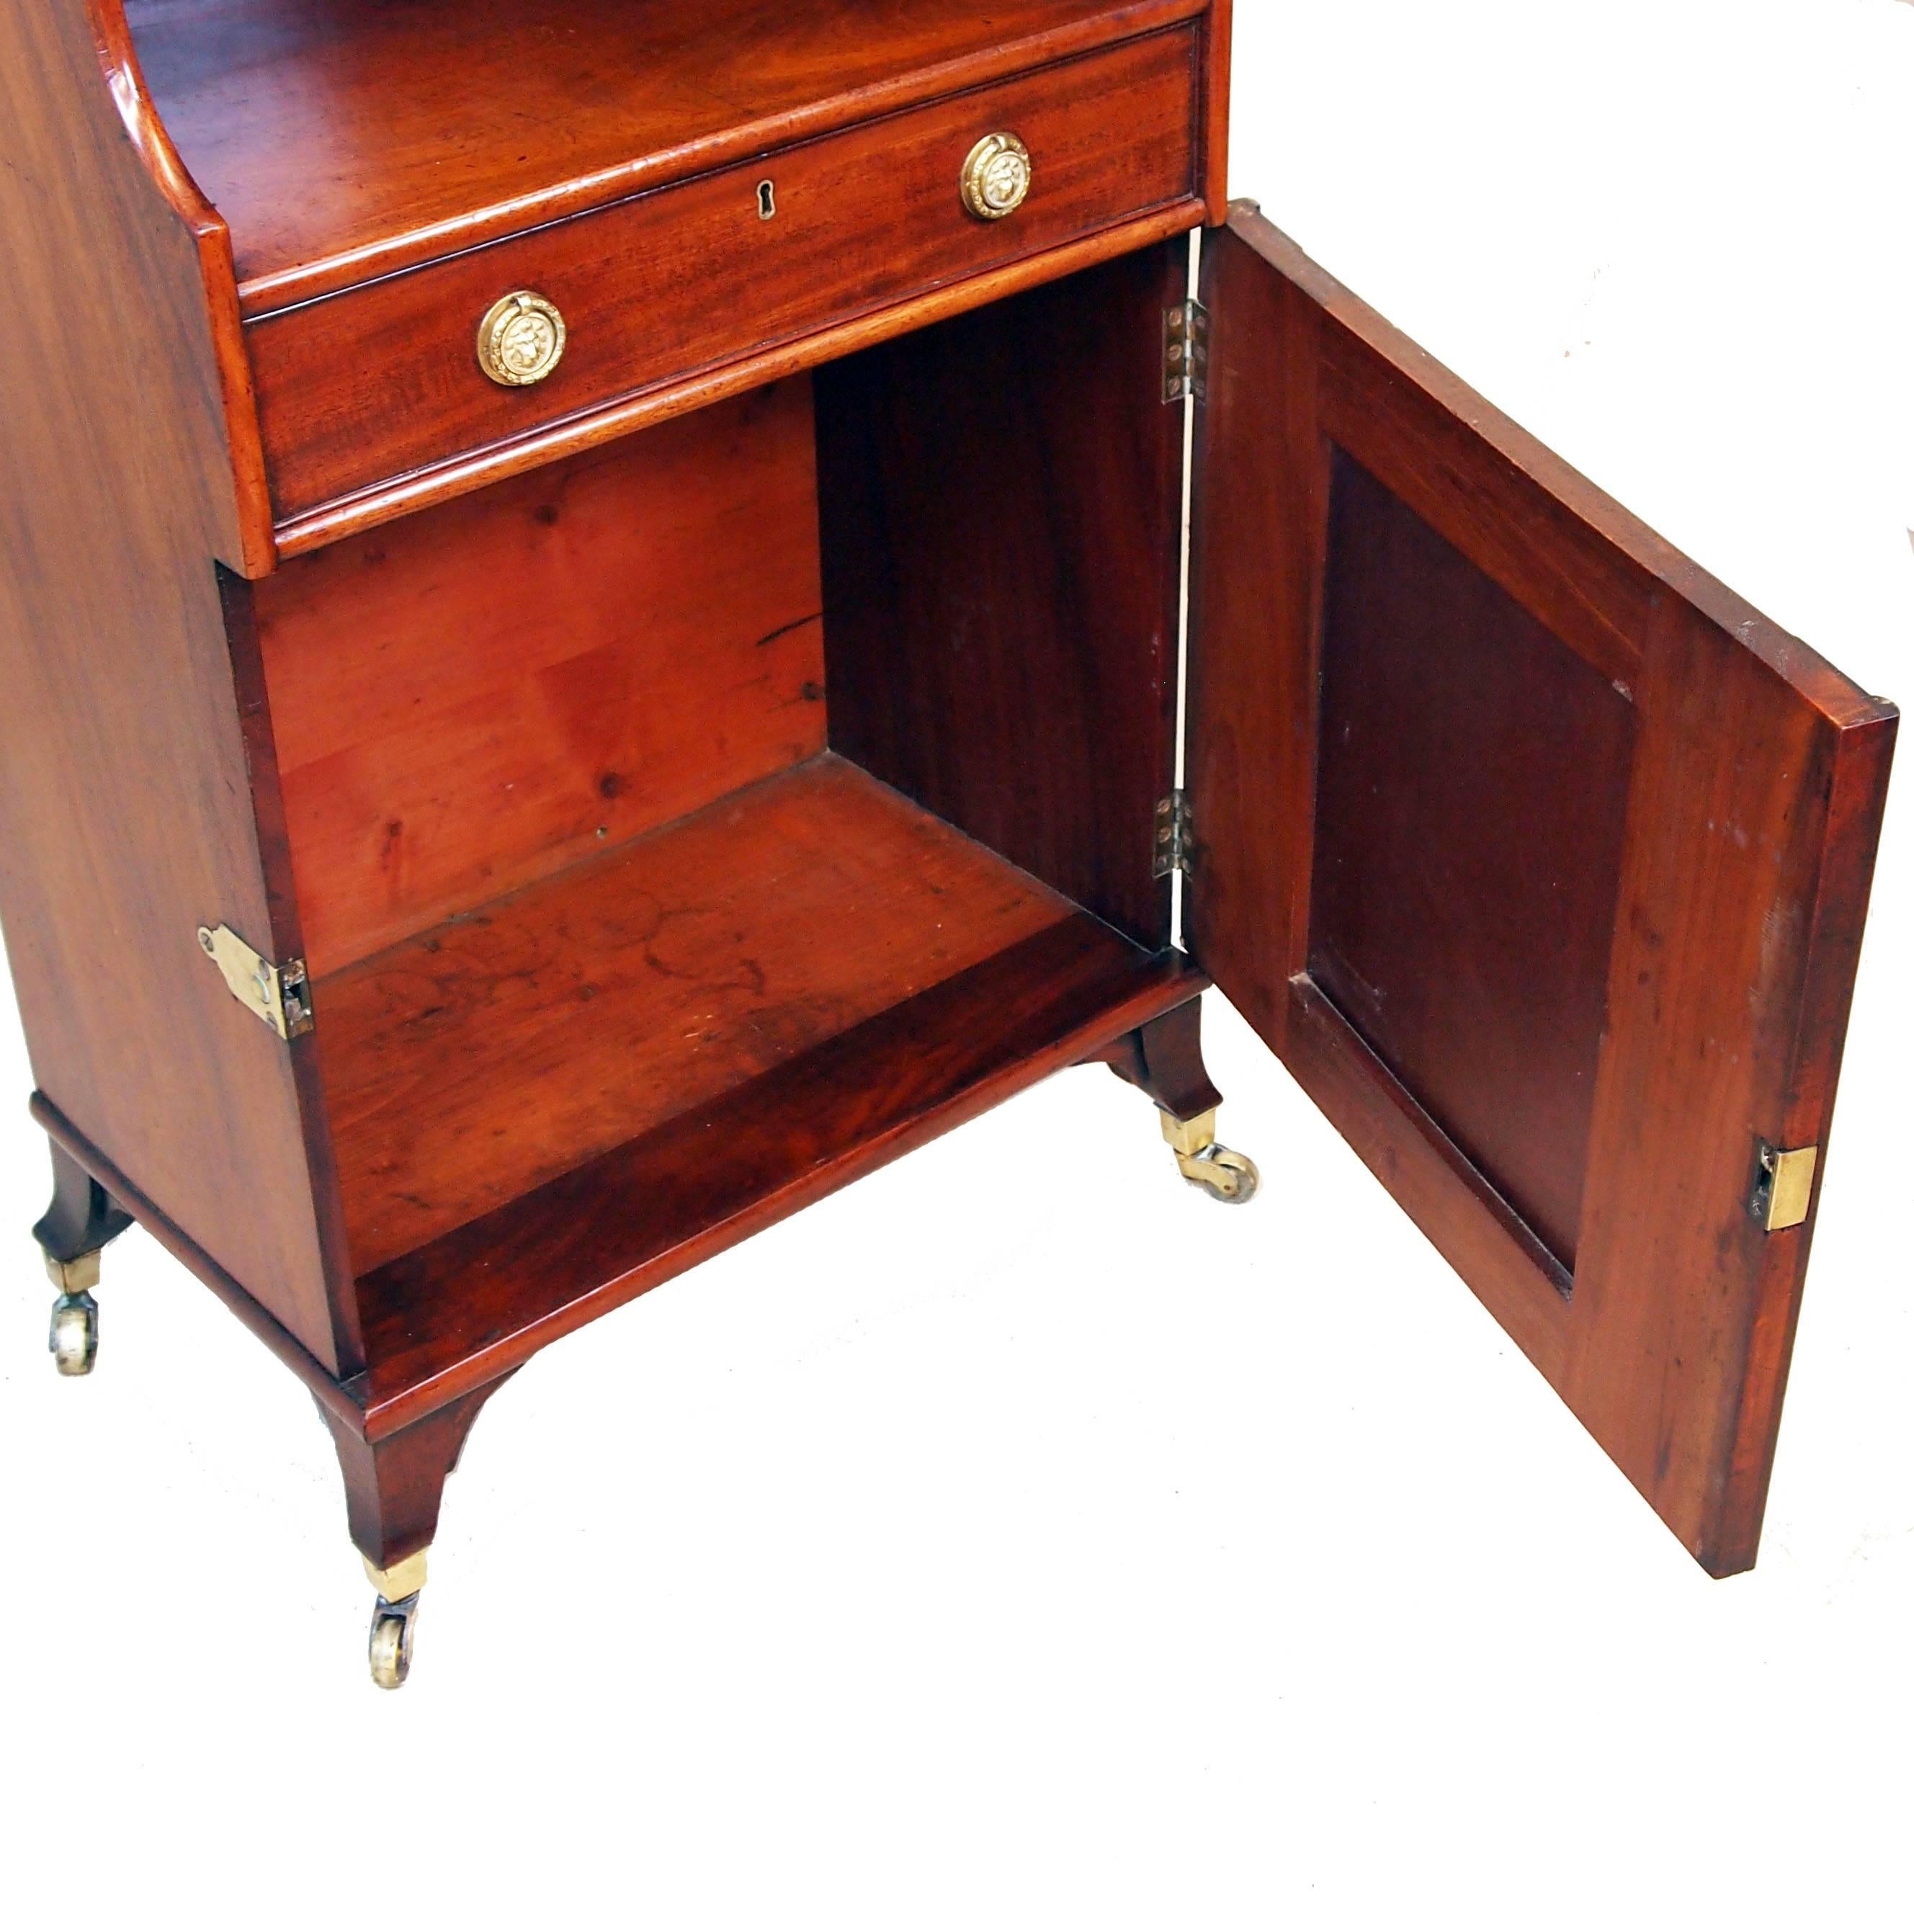 A superb quality regency period mahogany waterfall bookcase having two
shelves above one frieze drawer and well figured panel door raised on
extremely unusual and elegant shaped sabre legs with original brass
castors.